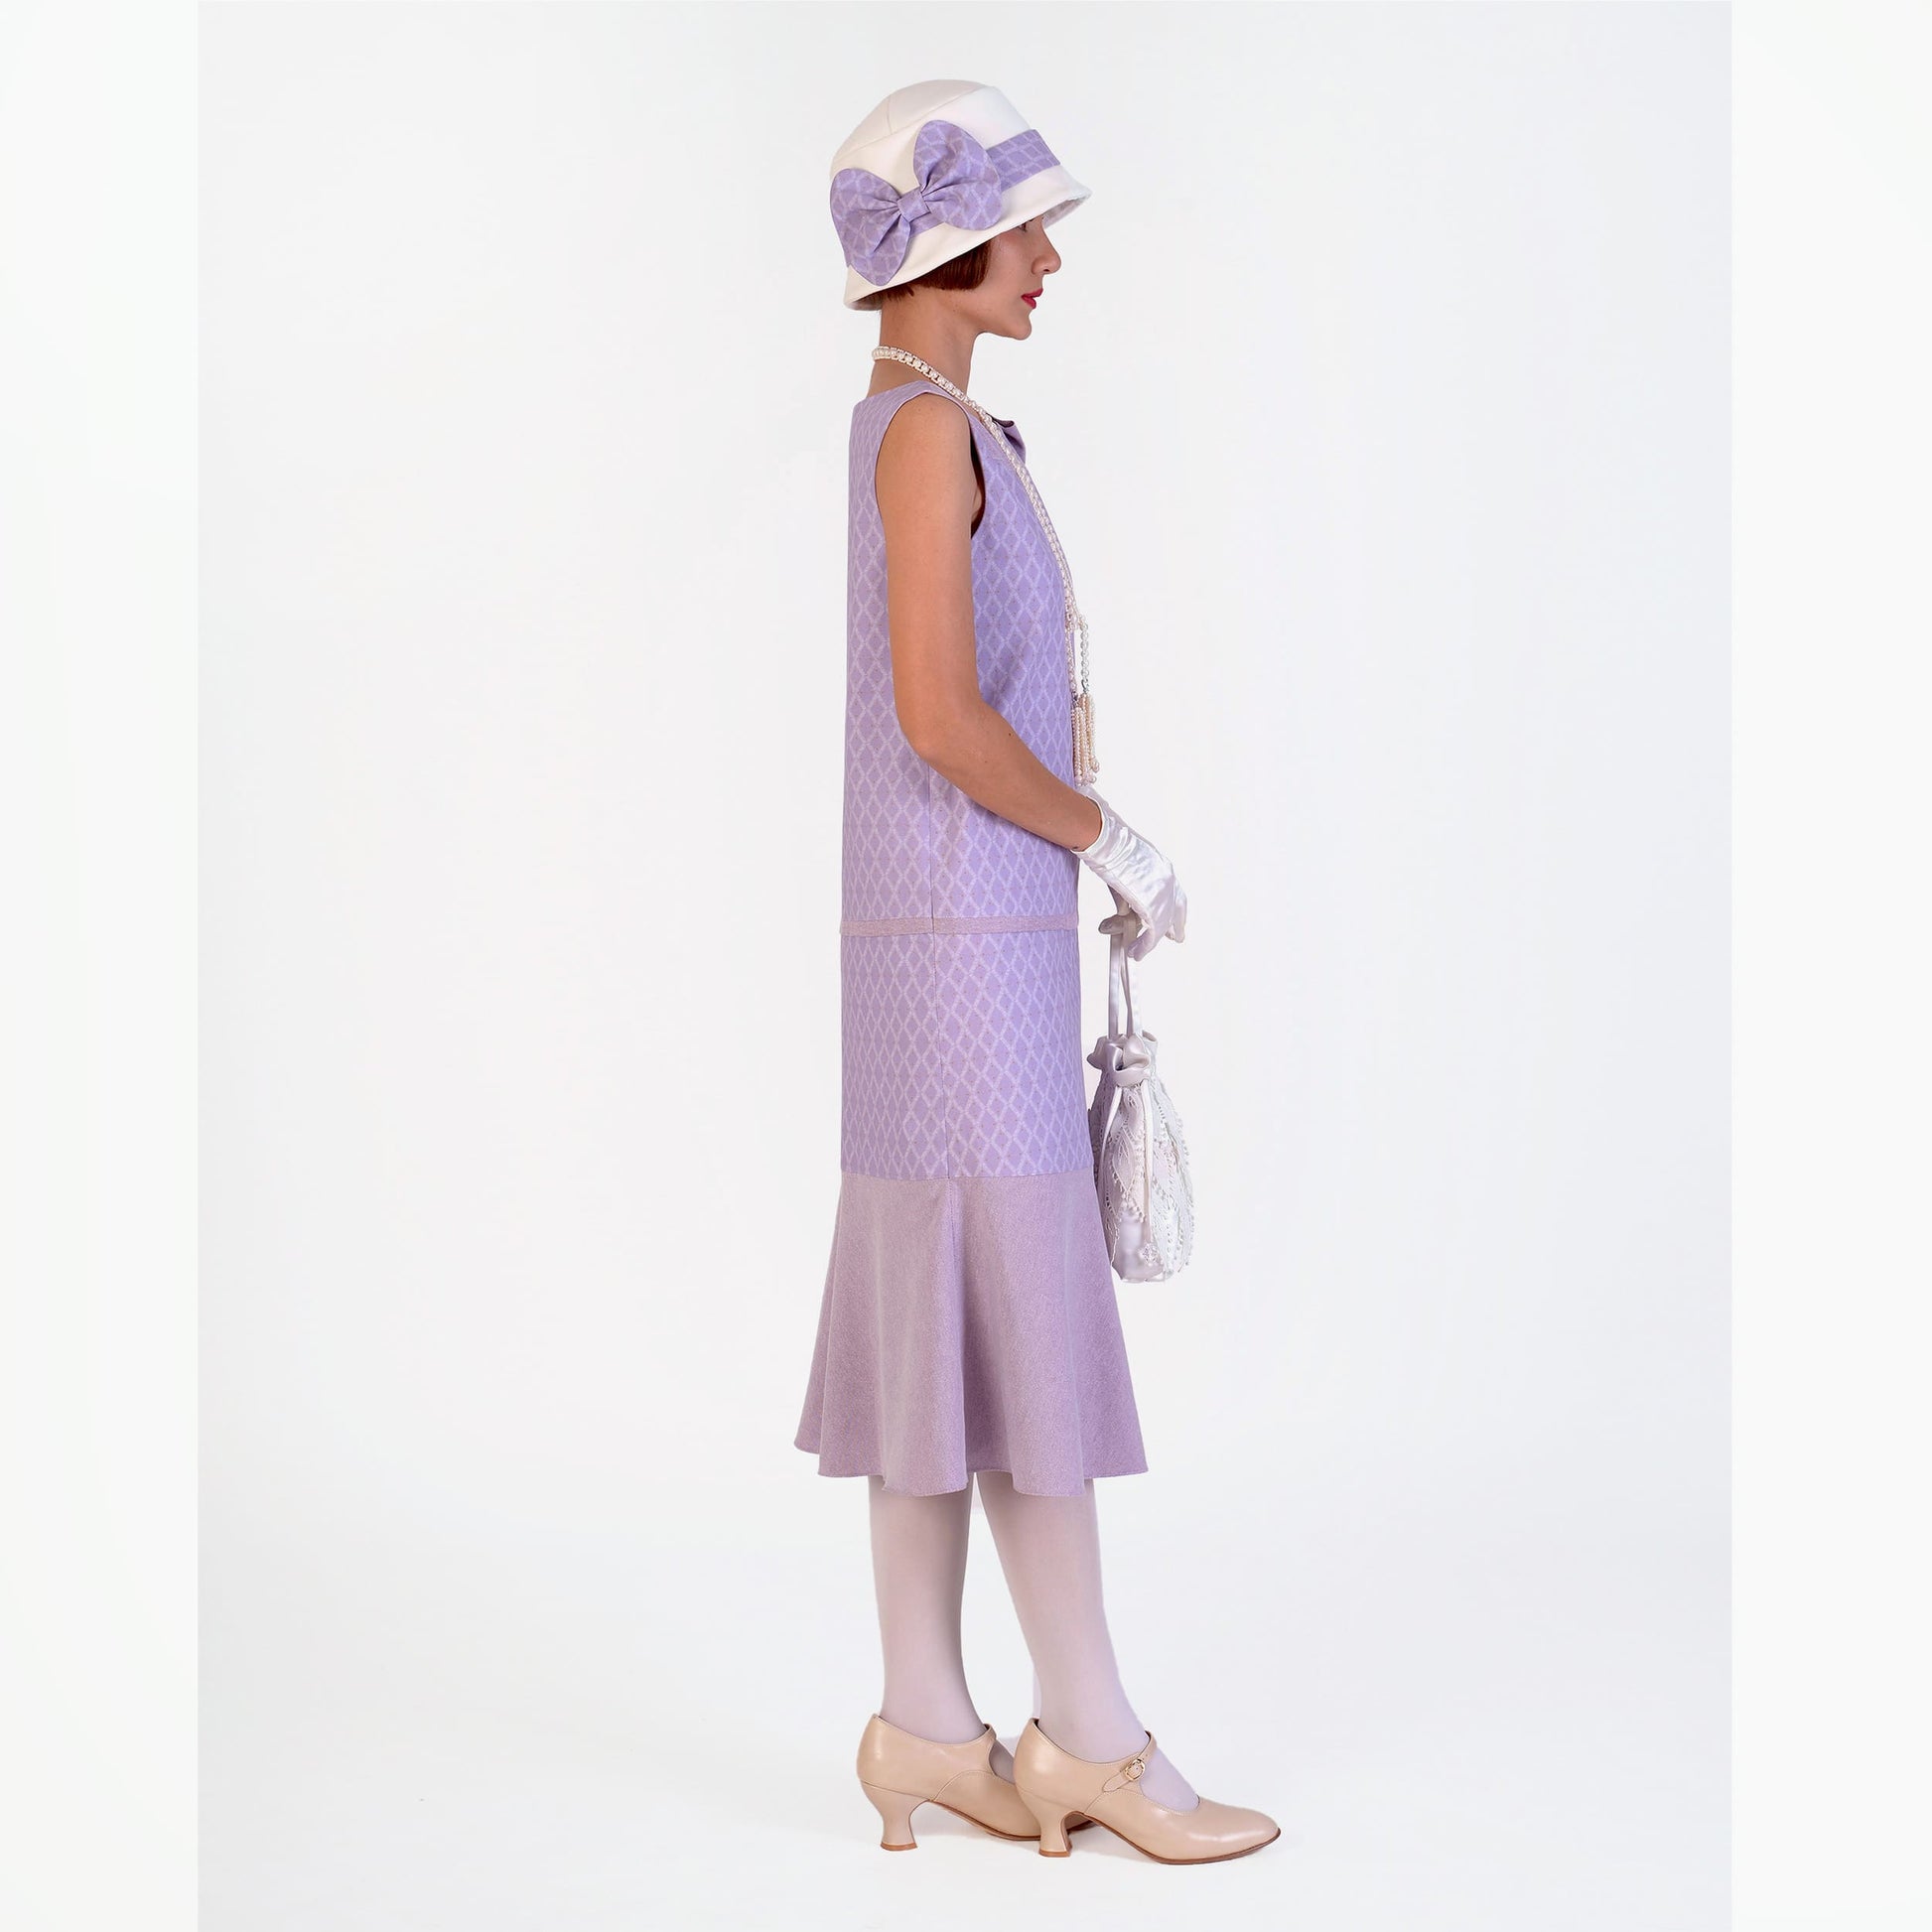 Cotton Gatsby day dress in light purple. The 1920s dress can be worn as a Great Gatsby party dress, flapper dress or Charleston dress.